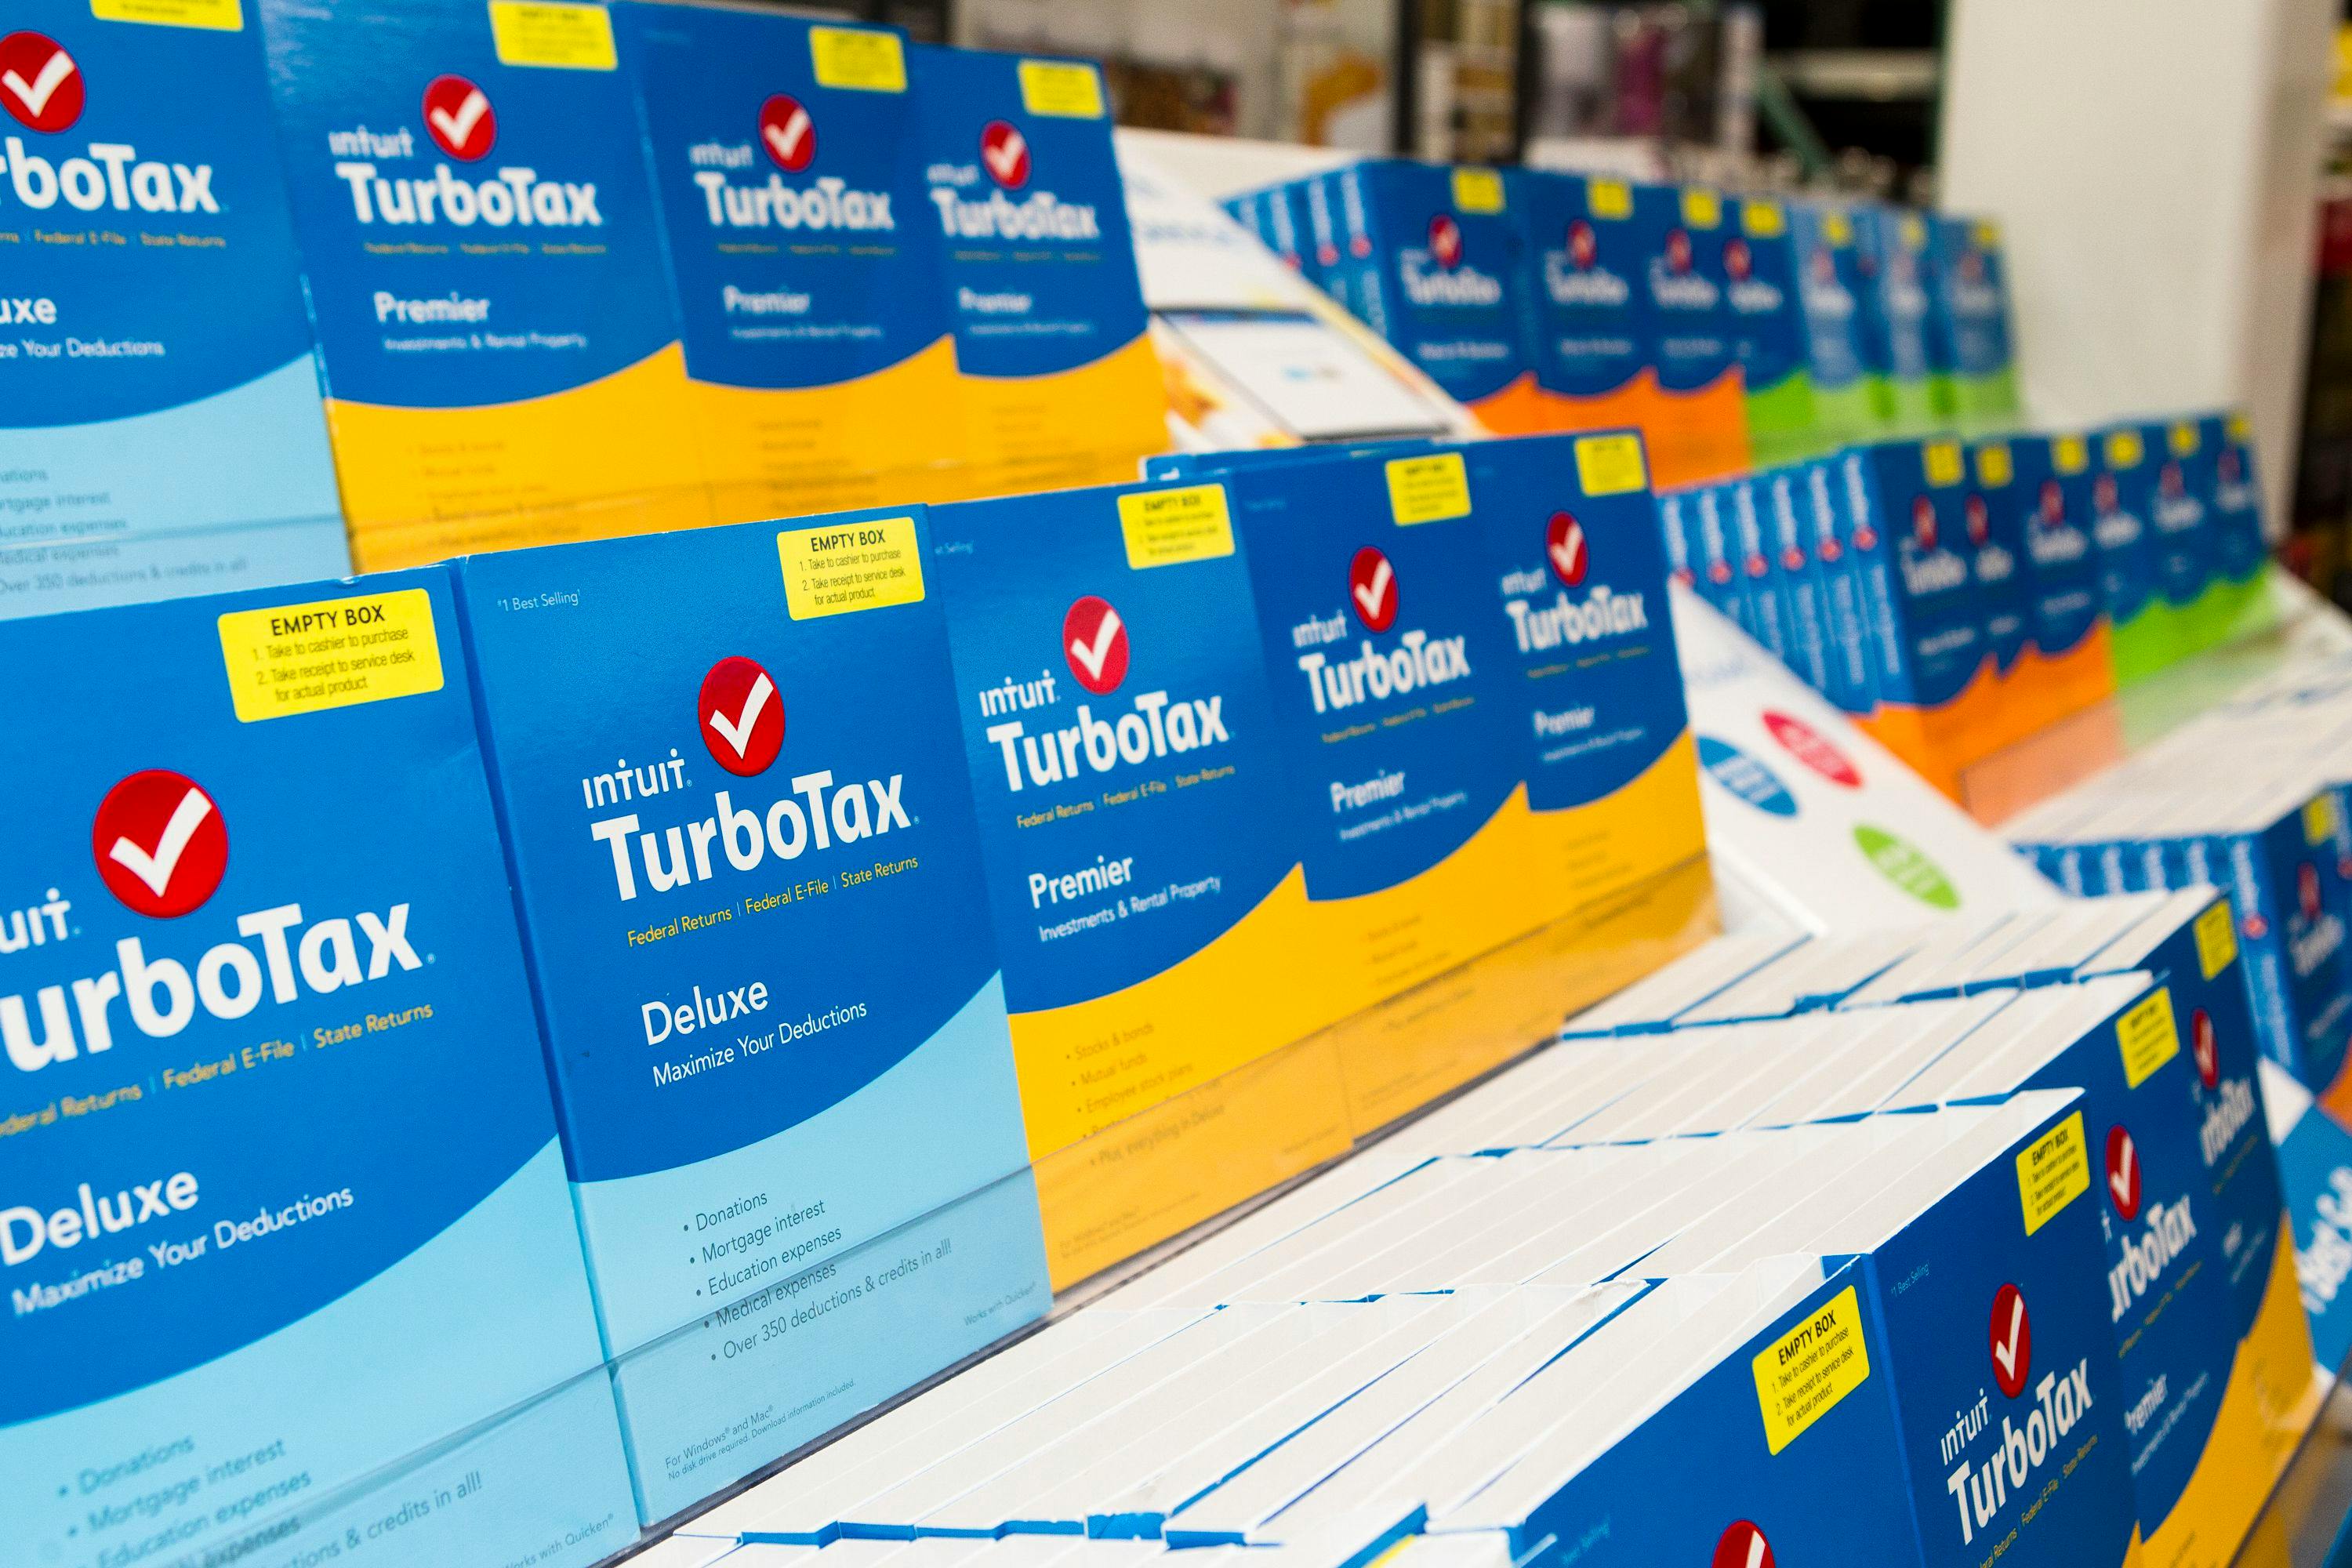 Boxes of TurboTax Deluxe and Premier software on display inside a store.